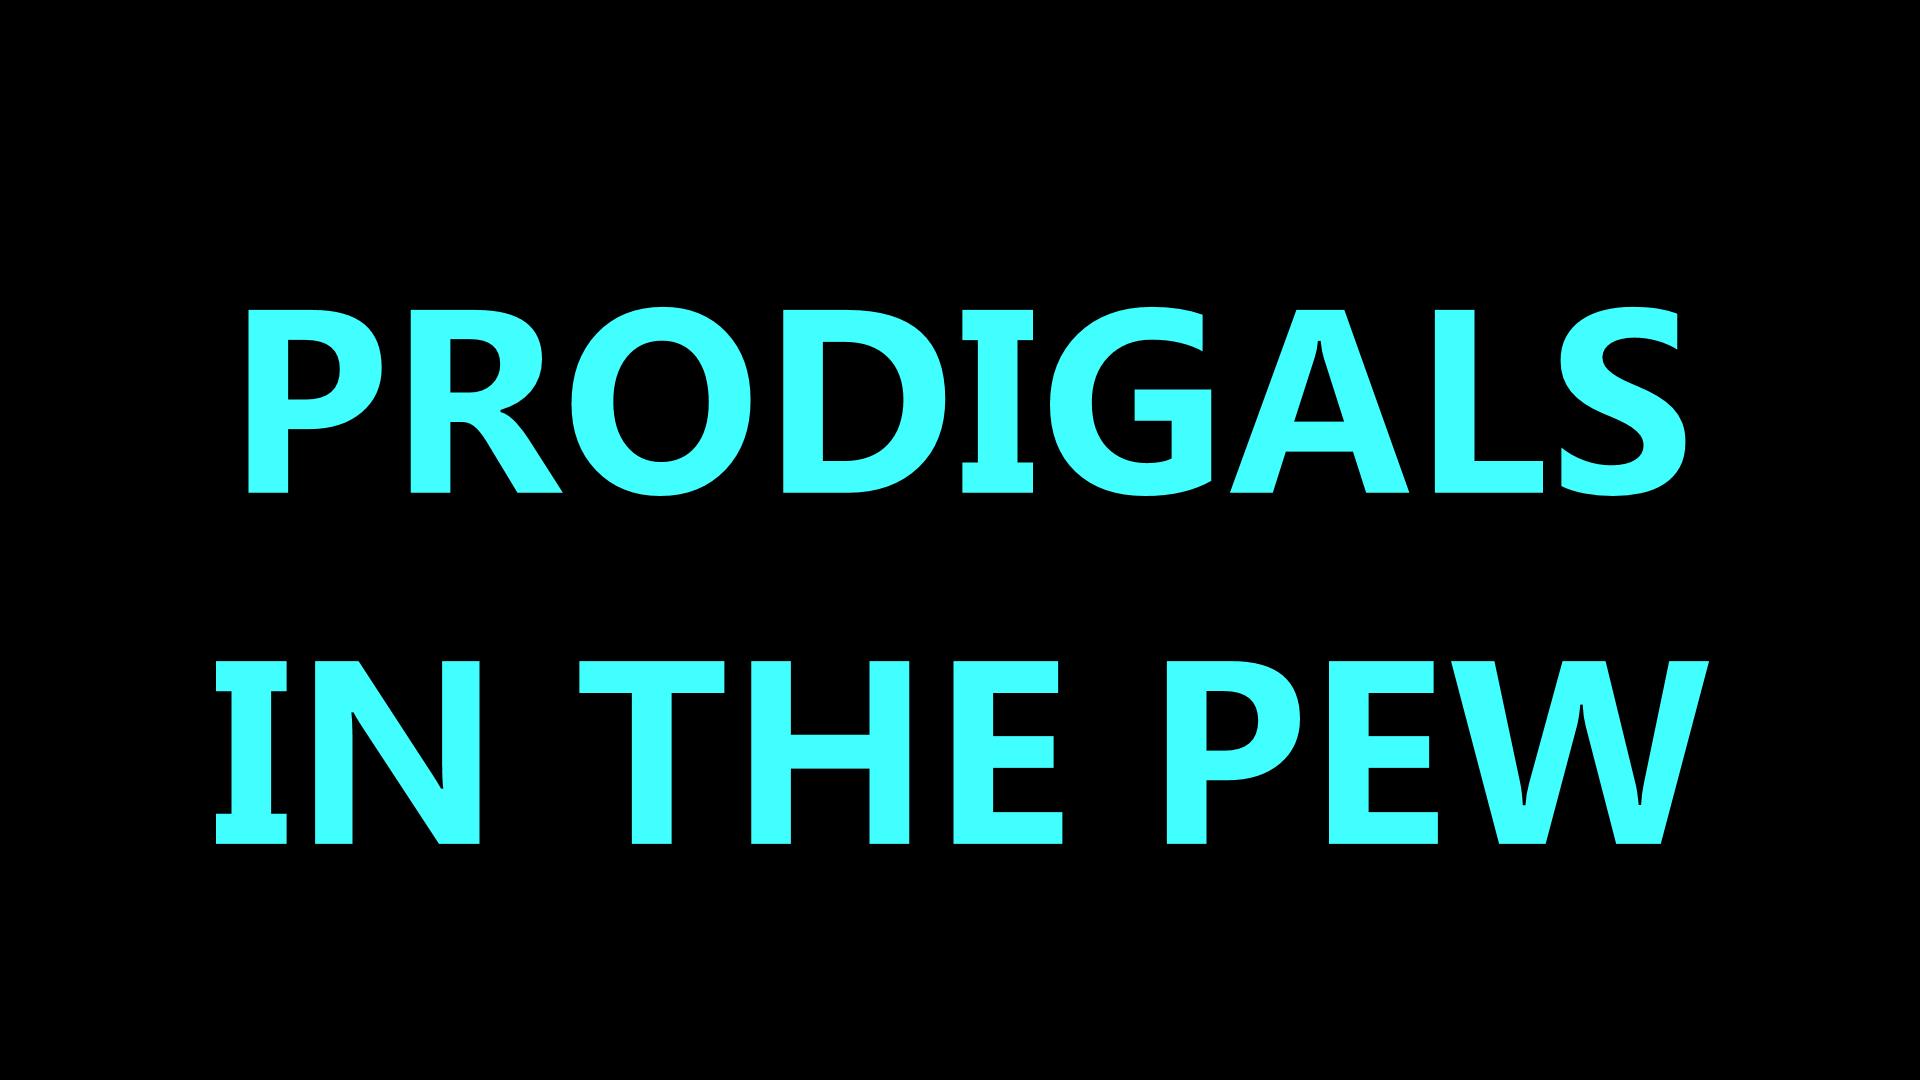 PRODIGALS IN THE PEWS